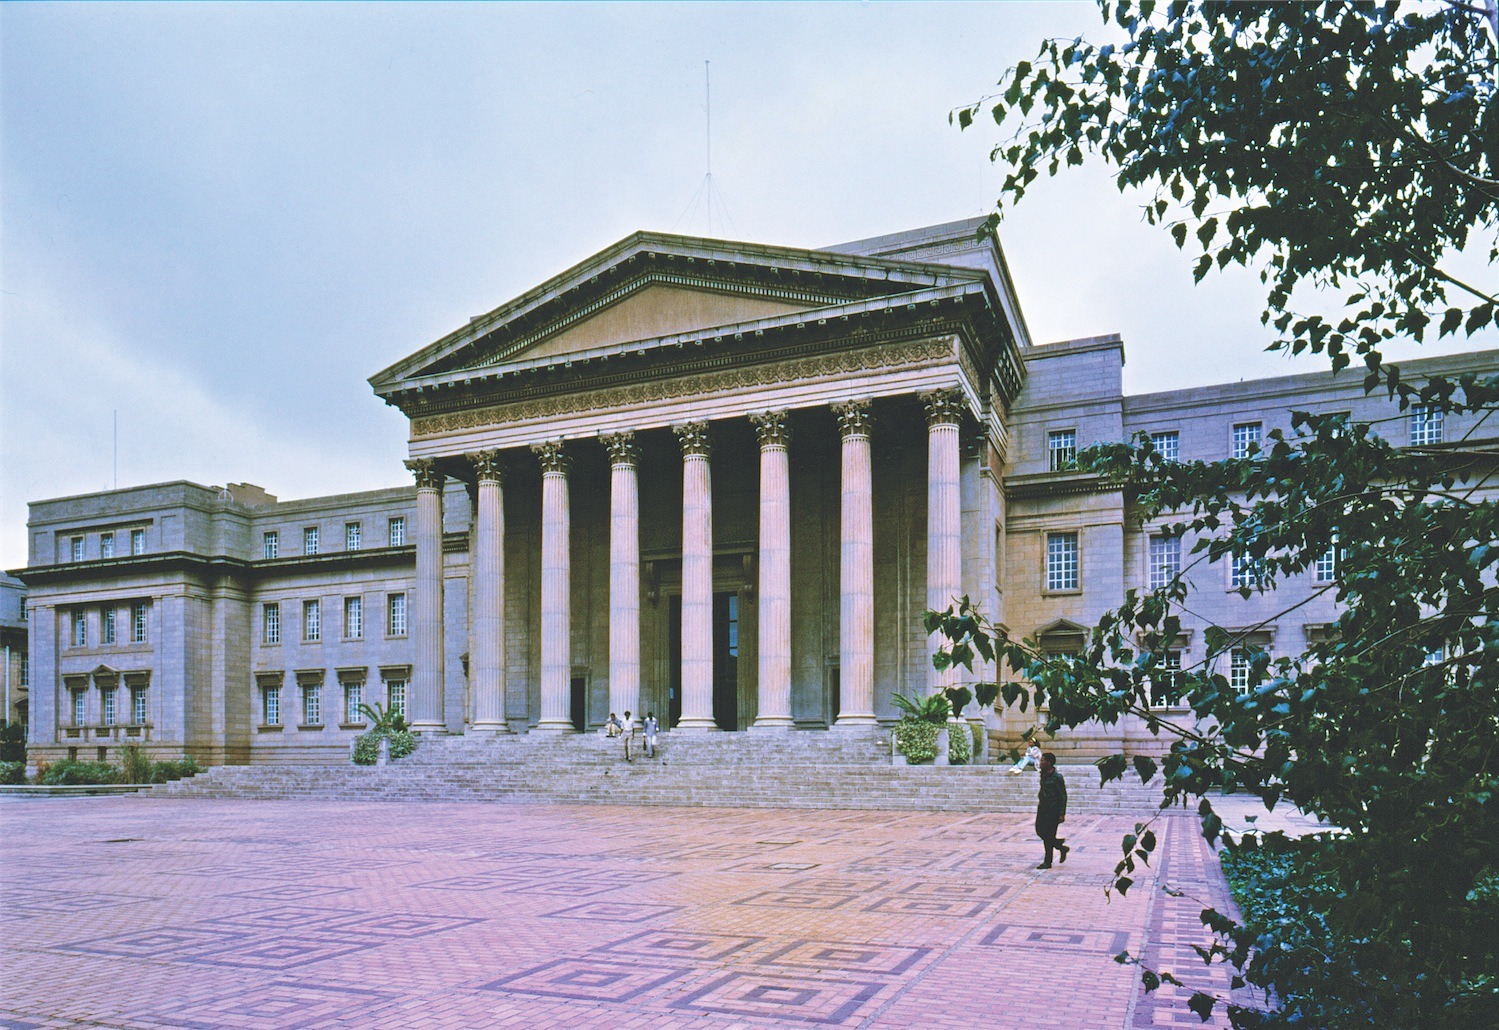 University of the Witwatersrand (Wits)